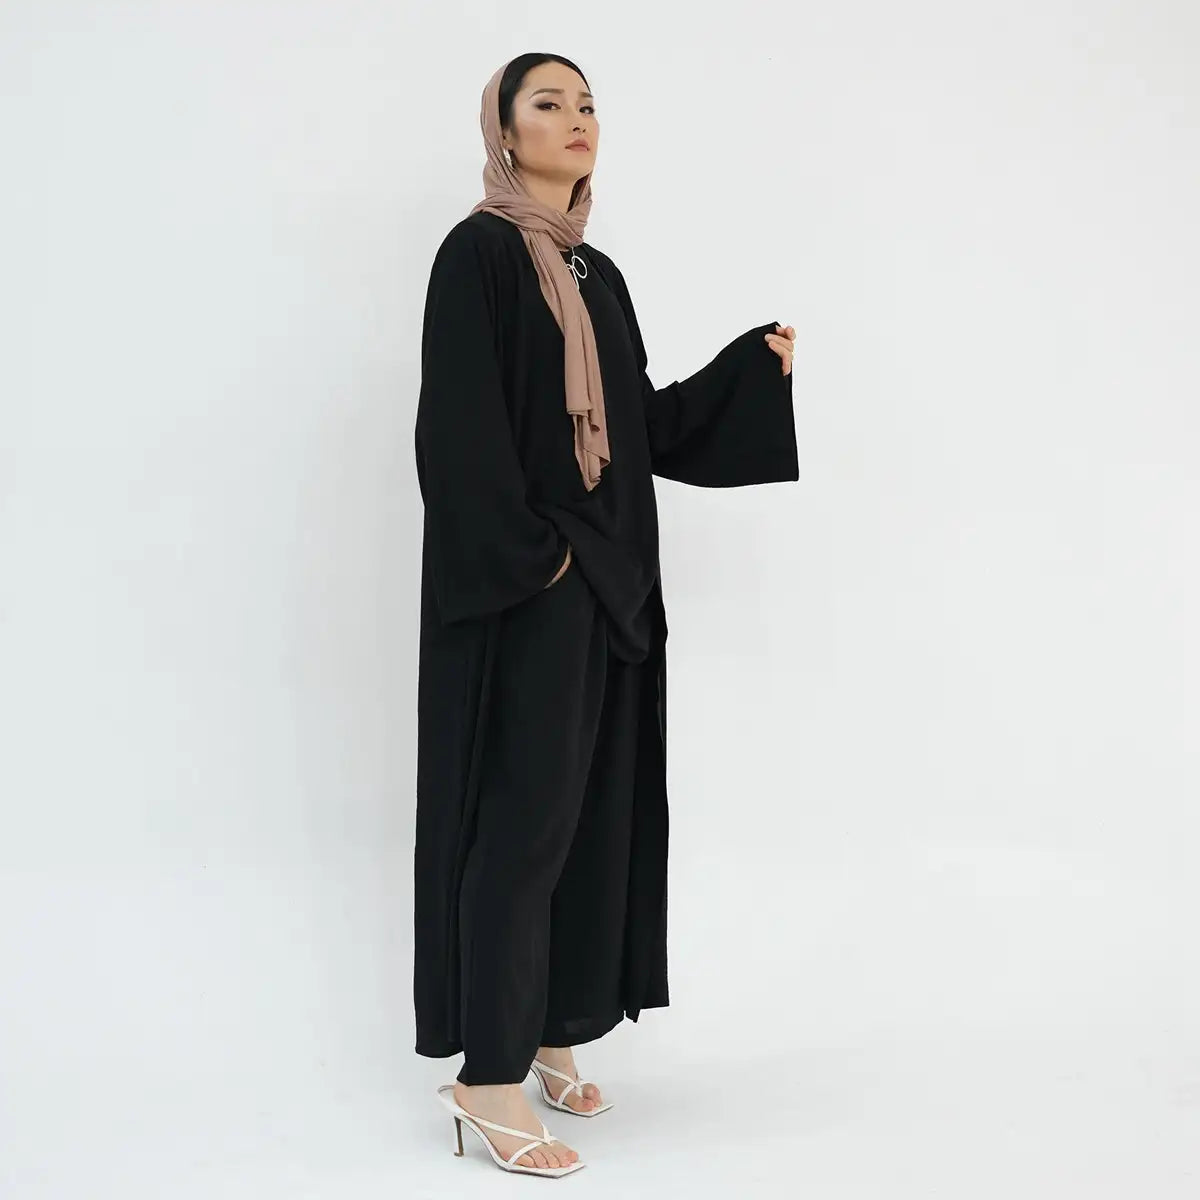 3 Pieces Set Tops Pant Suit With Open Abaya Dress For Muslim Women